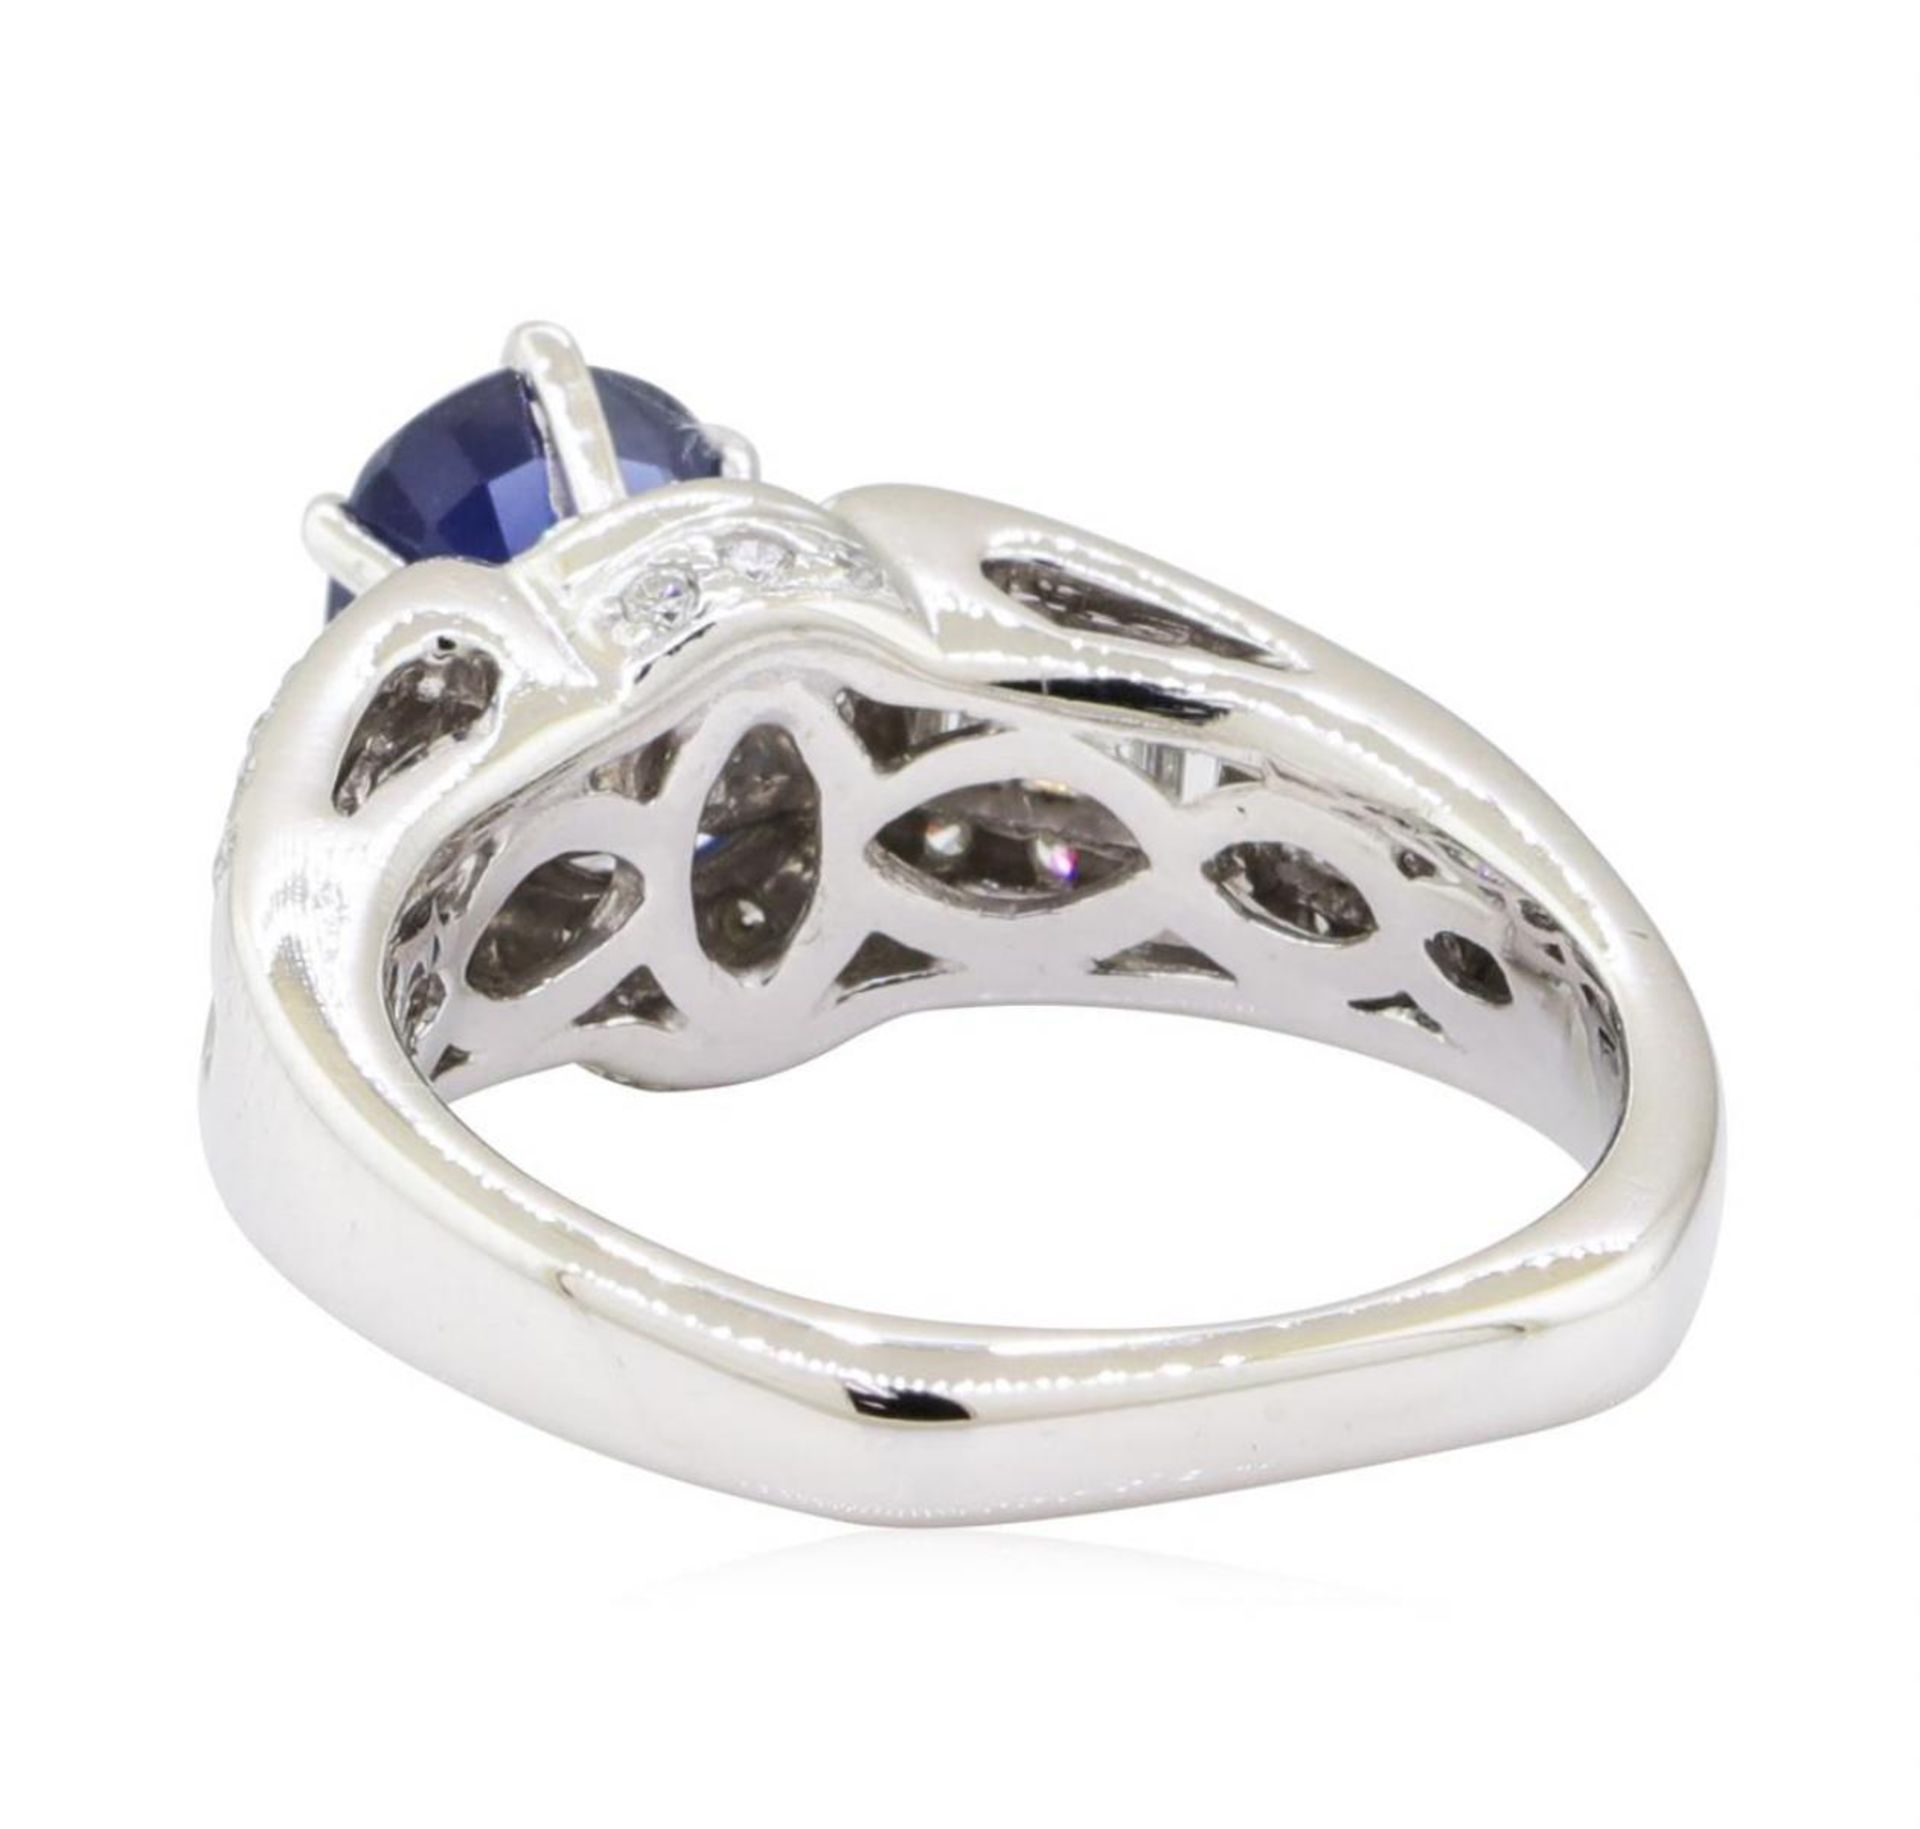 2.01 ctw Sapphire and Diamond Ring - 14KT White Gold - Image 3 of 5